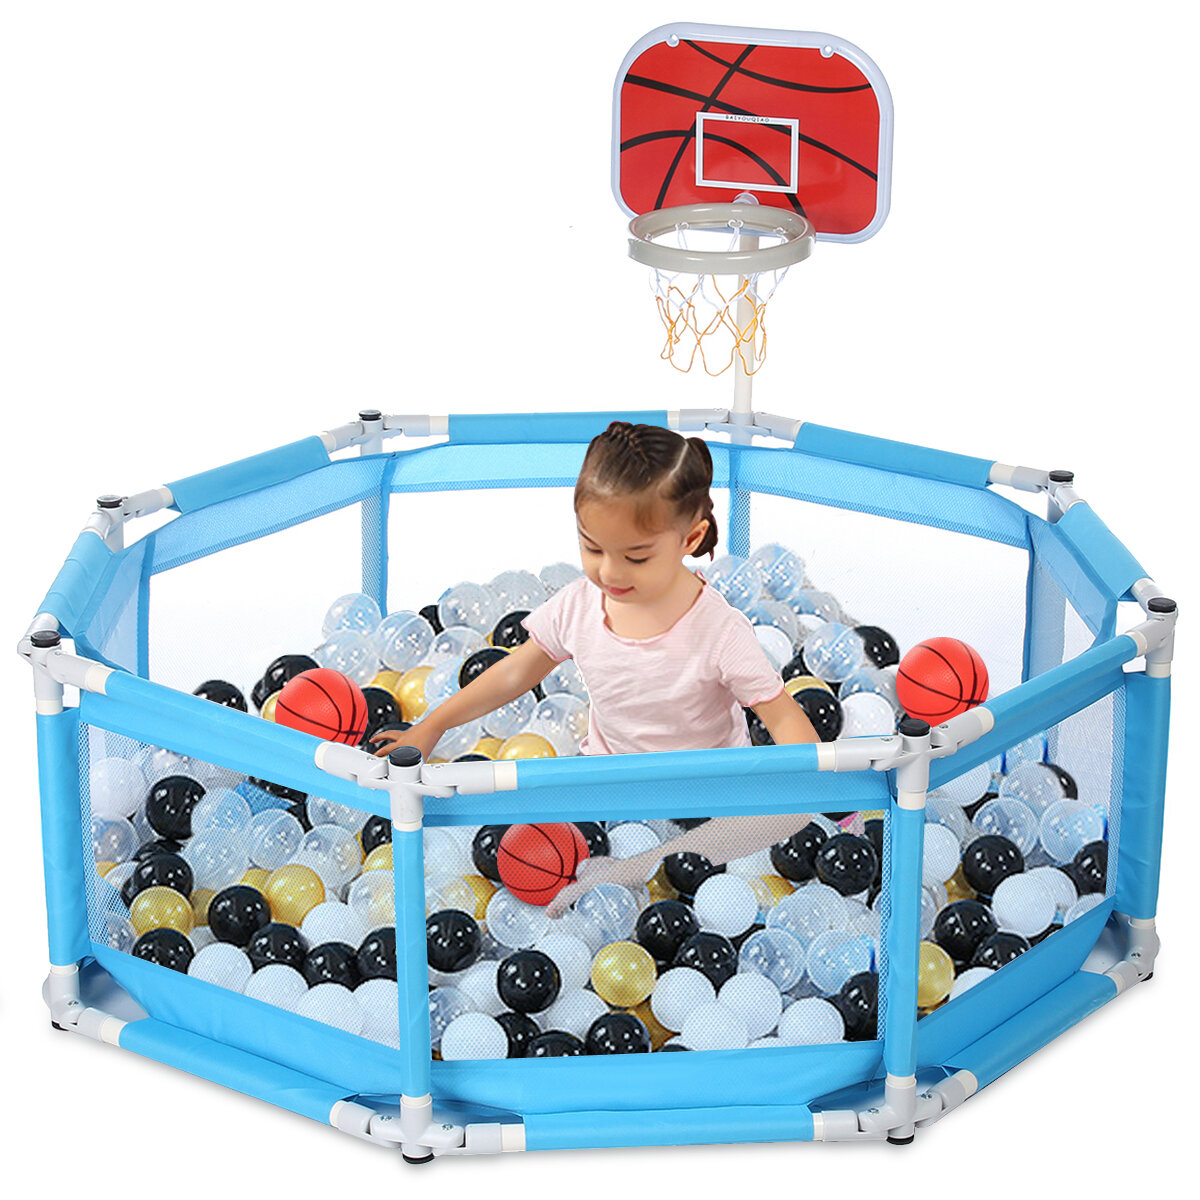 Image of Foldable Portable Baby Playpen Square Children Toddler Kids Safety Fence Indoor Outdoor Play Pen Ocean Portable Ball Pit